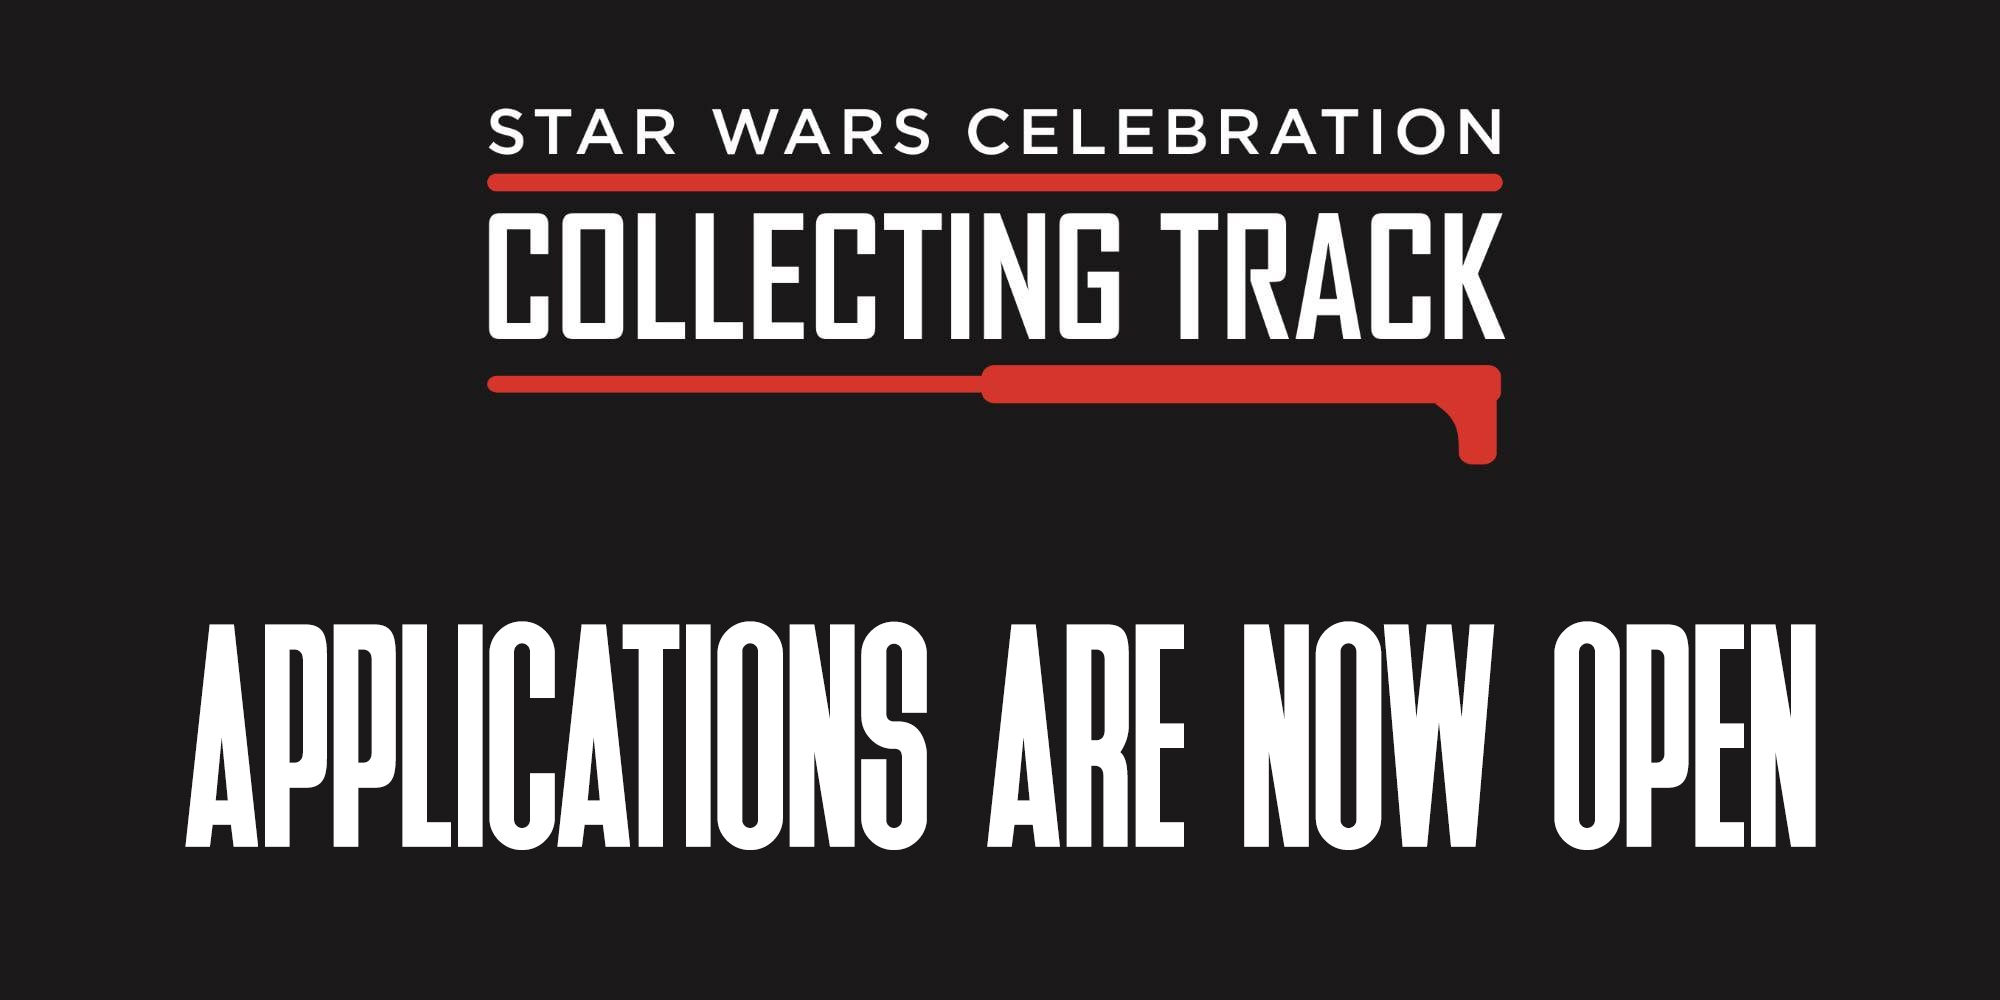 Star Wars Celebration Collecting Track 2022 Announced